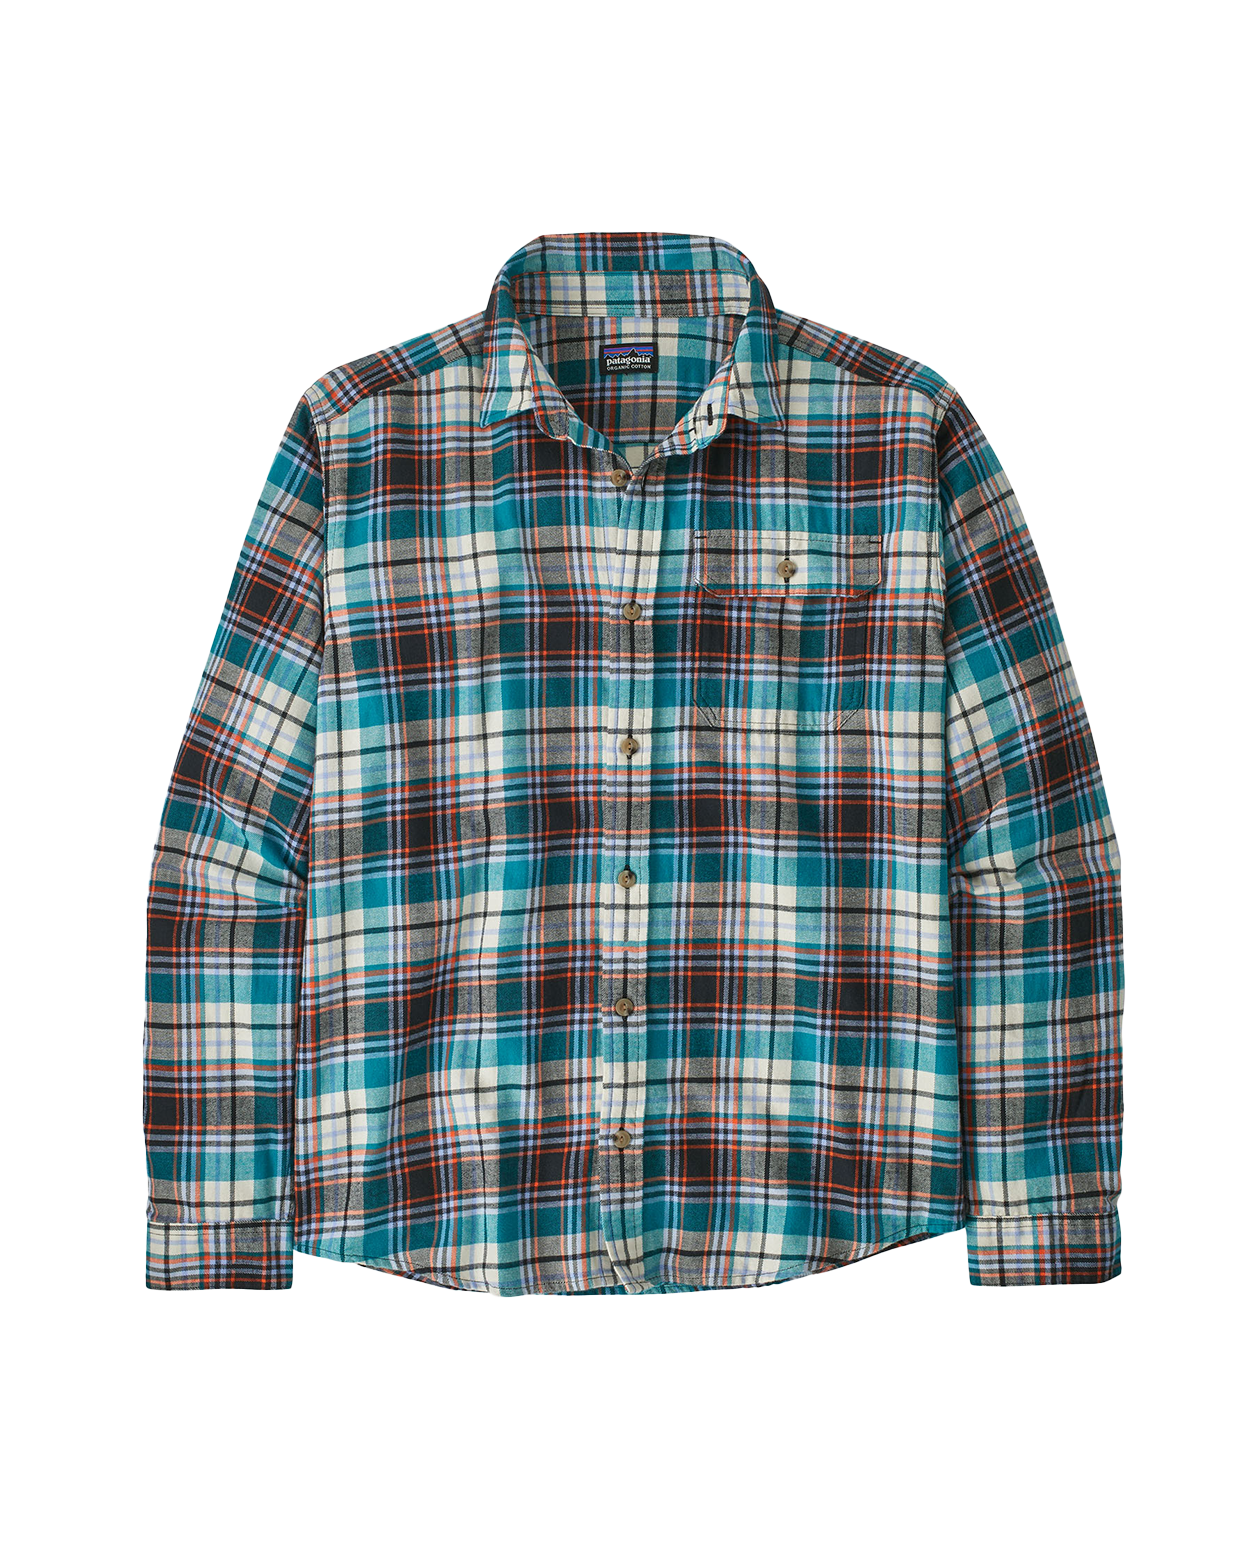 Patagonia M L/S Cotton in Conversion LW Fjord Flannel Shirt Belay Blue